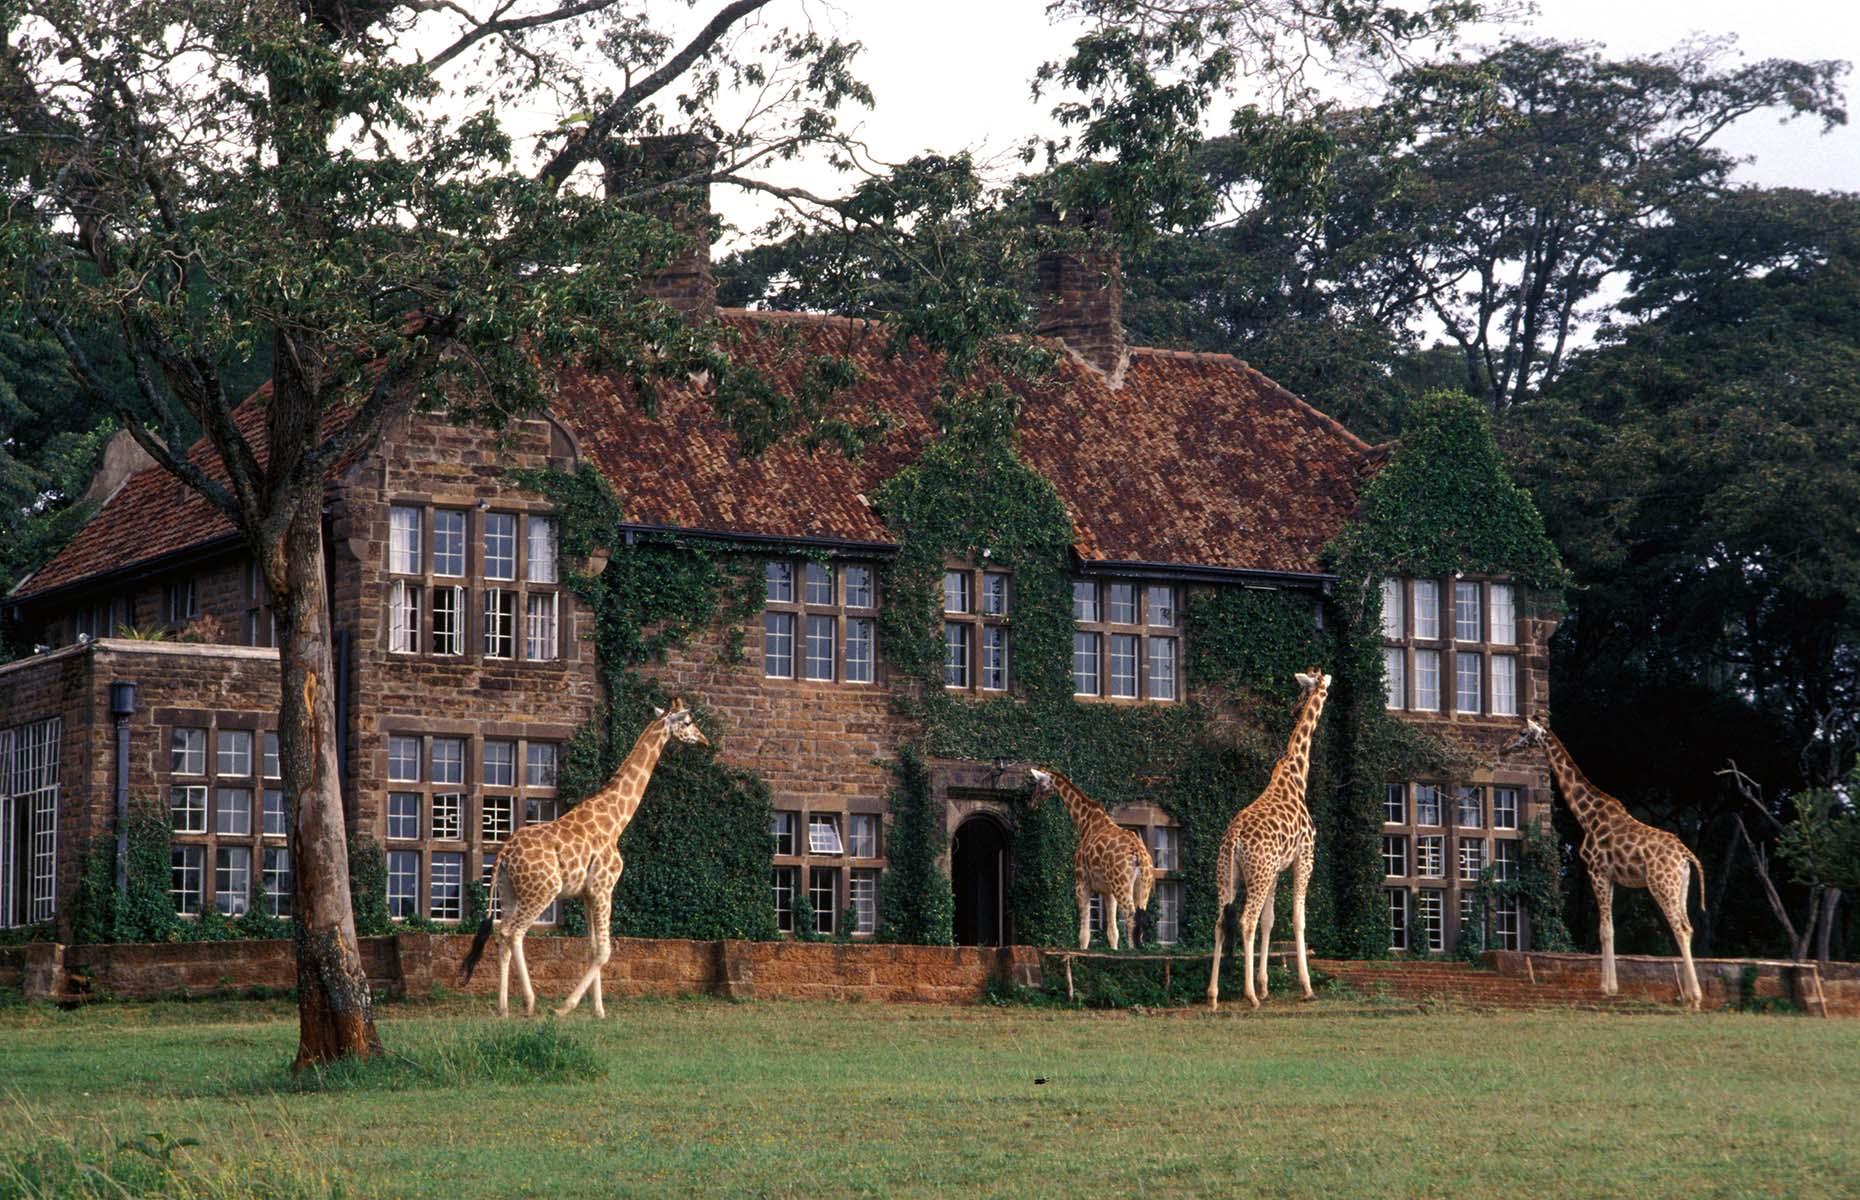 <p><a href="https://www.thesafaricollection.com/properties/giraffe-manor/">Giraffe Manor</a>, located just outside of Nairobi in Kenya, is a chance to share a meal with a herd of Rothschild's giraffes – one of the most endangered species of these animals. The stately home itself is a perfect example of laid-back luxury with clever little giraffe-themed accessories throughout. When you're not busy making friends with the stunning animals, the hotel does a lot to educate its visitors about animal conservation and offers guided sanctuary walks. </p>